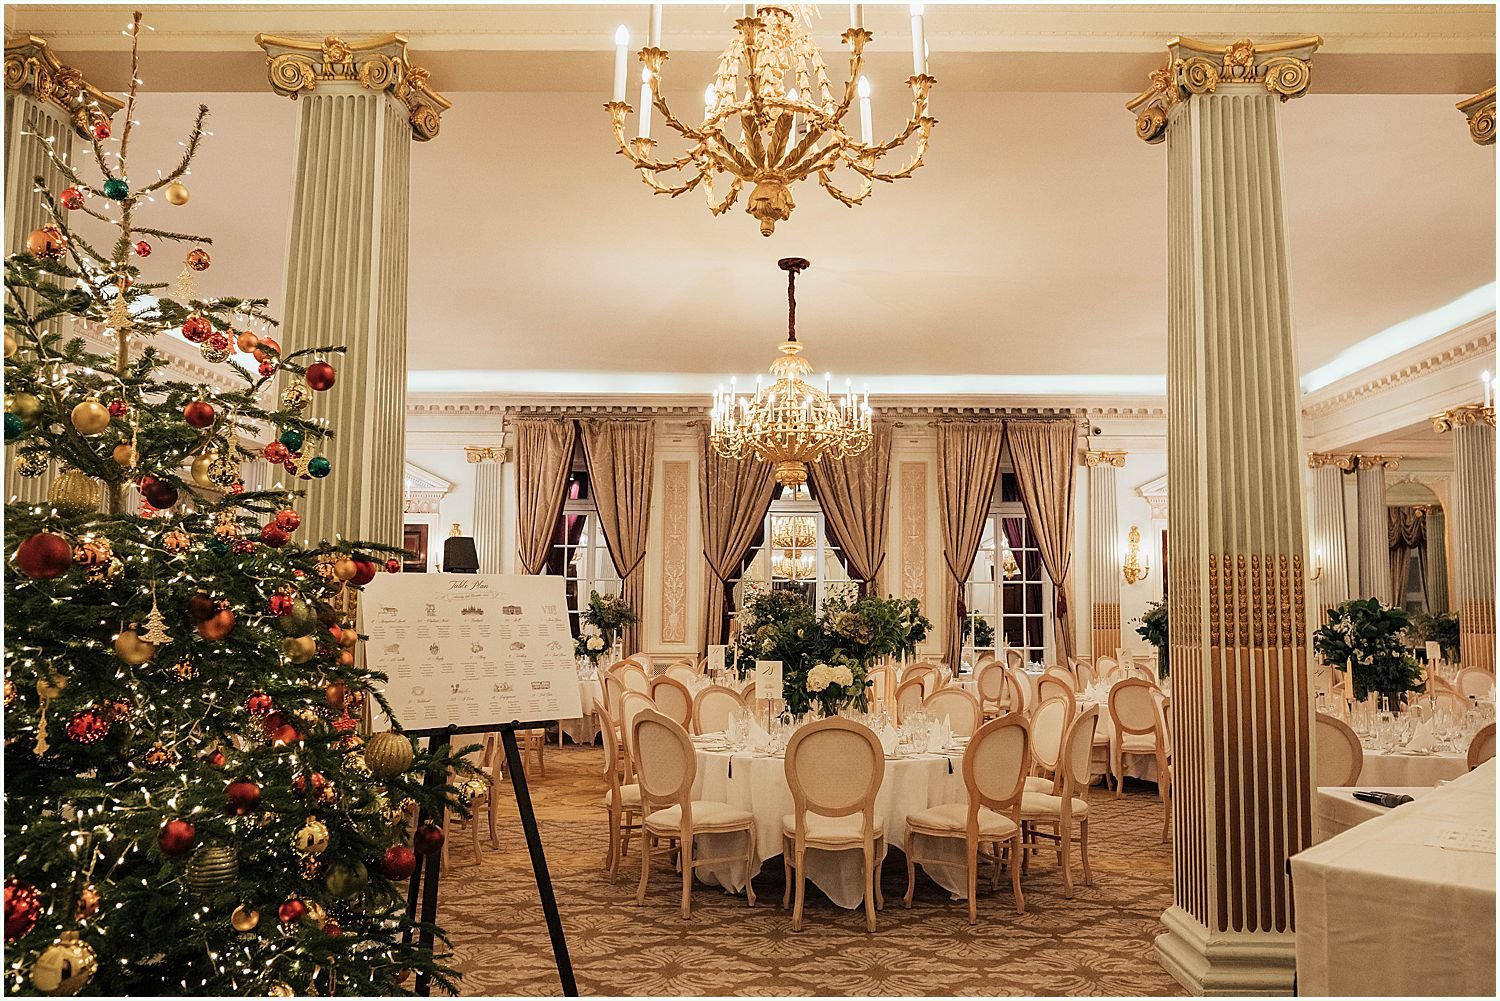 Reception room at RAC decorated for Christmas